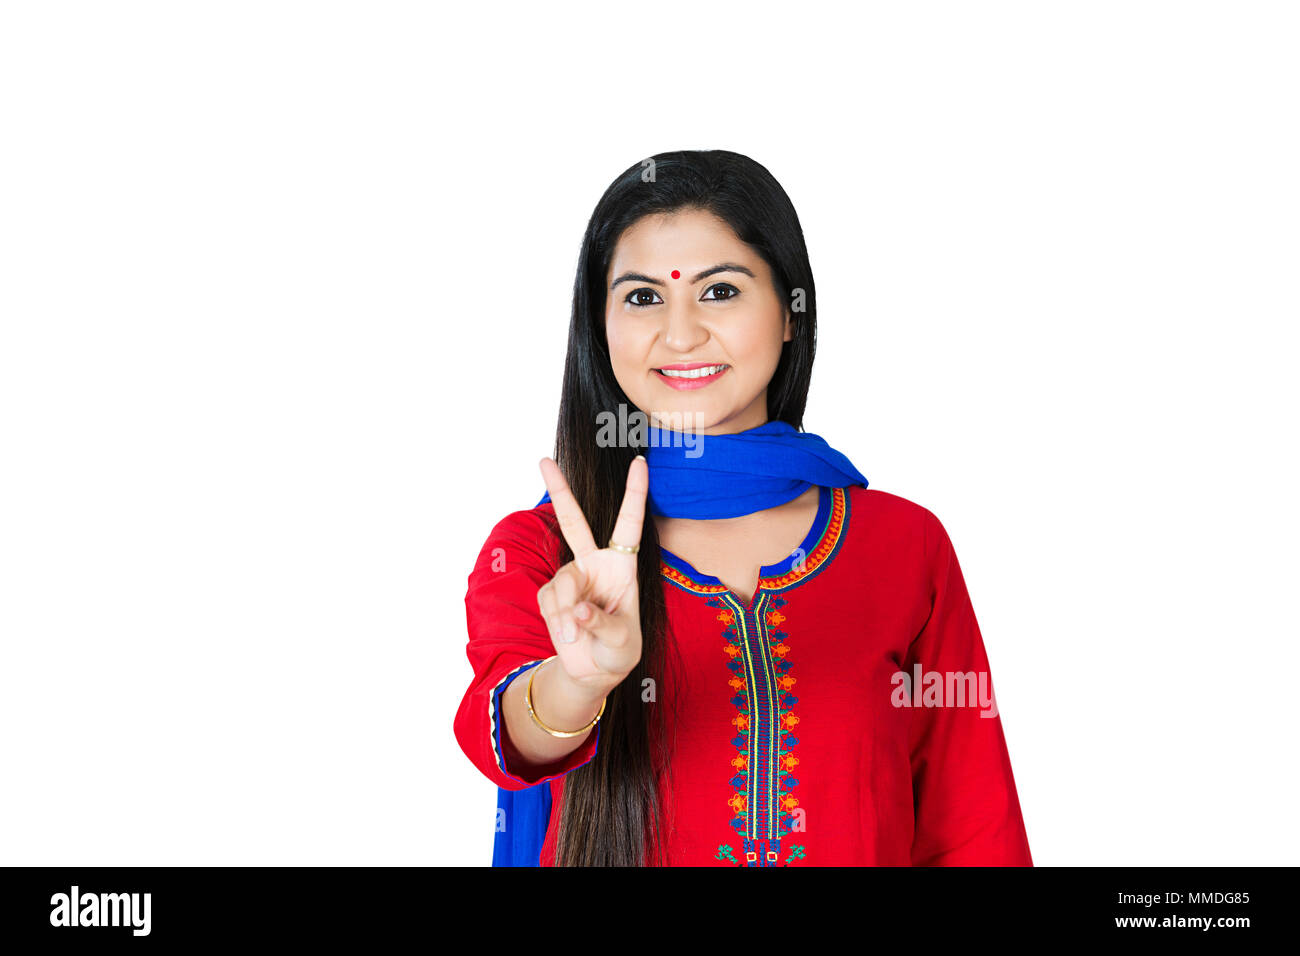 One Traditionally Indian Female showing Finger A peace sign. Smiling Stock Photo